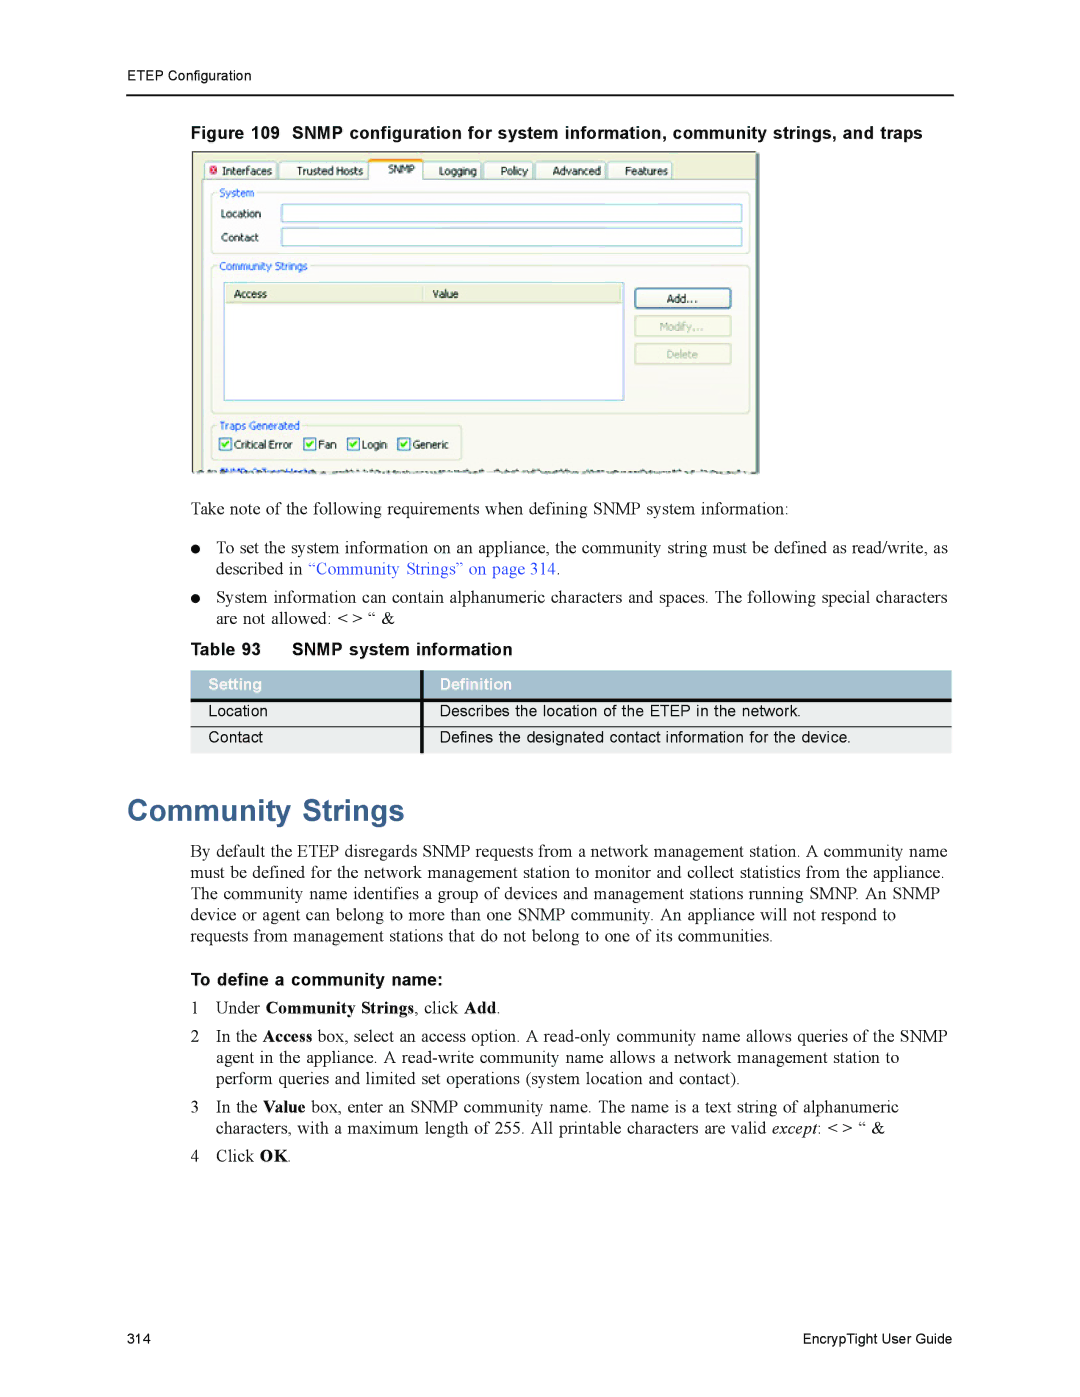 Black Box ET0010A, ET1000A, EncrypTight Community Strings, Snmp system information, To define a community name, Definition 